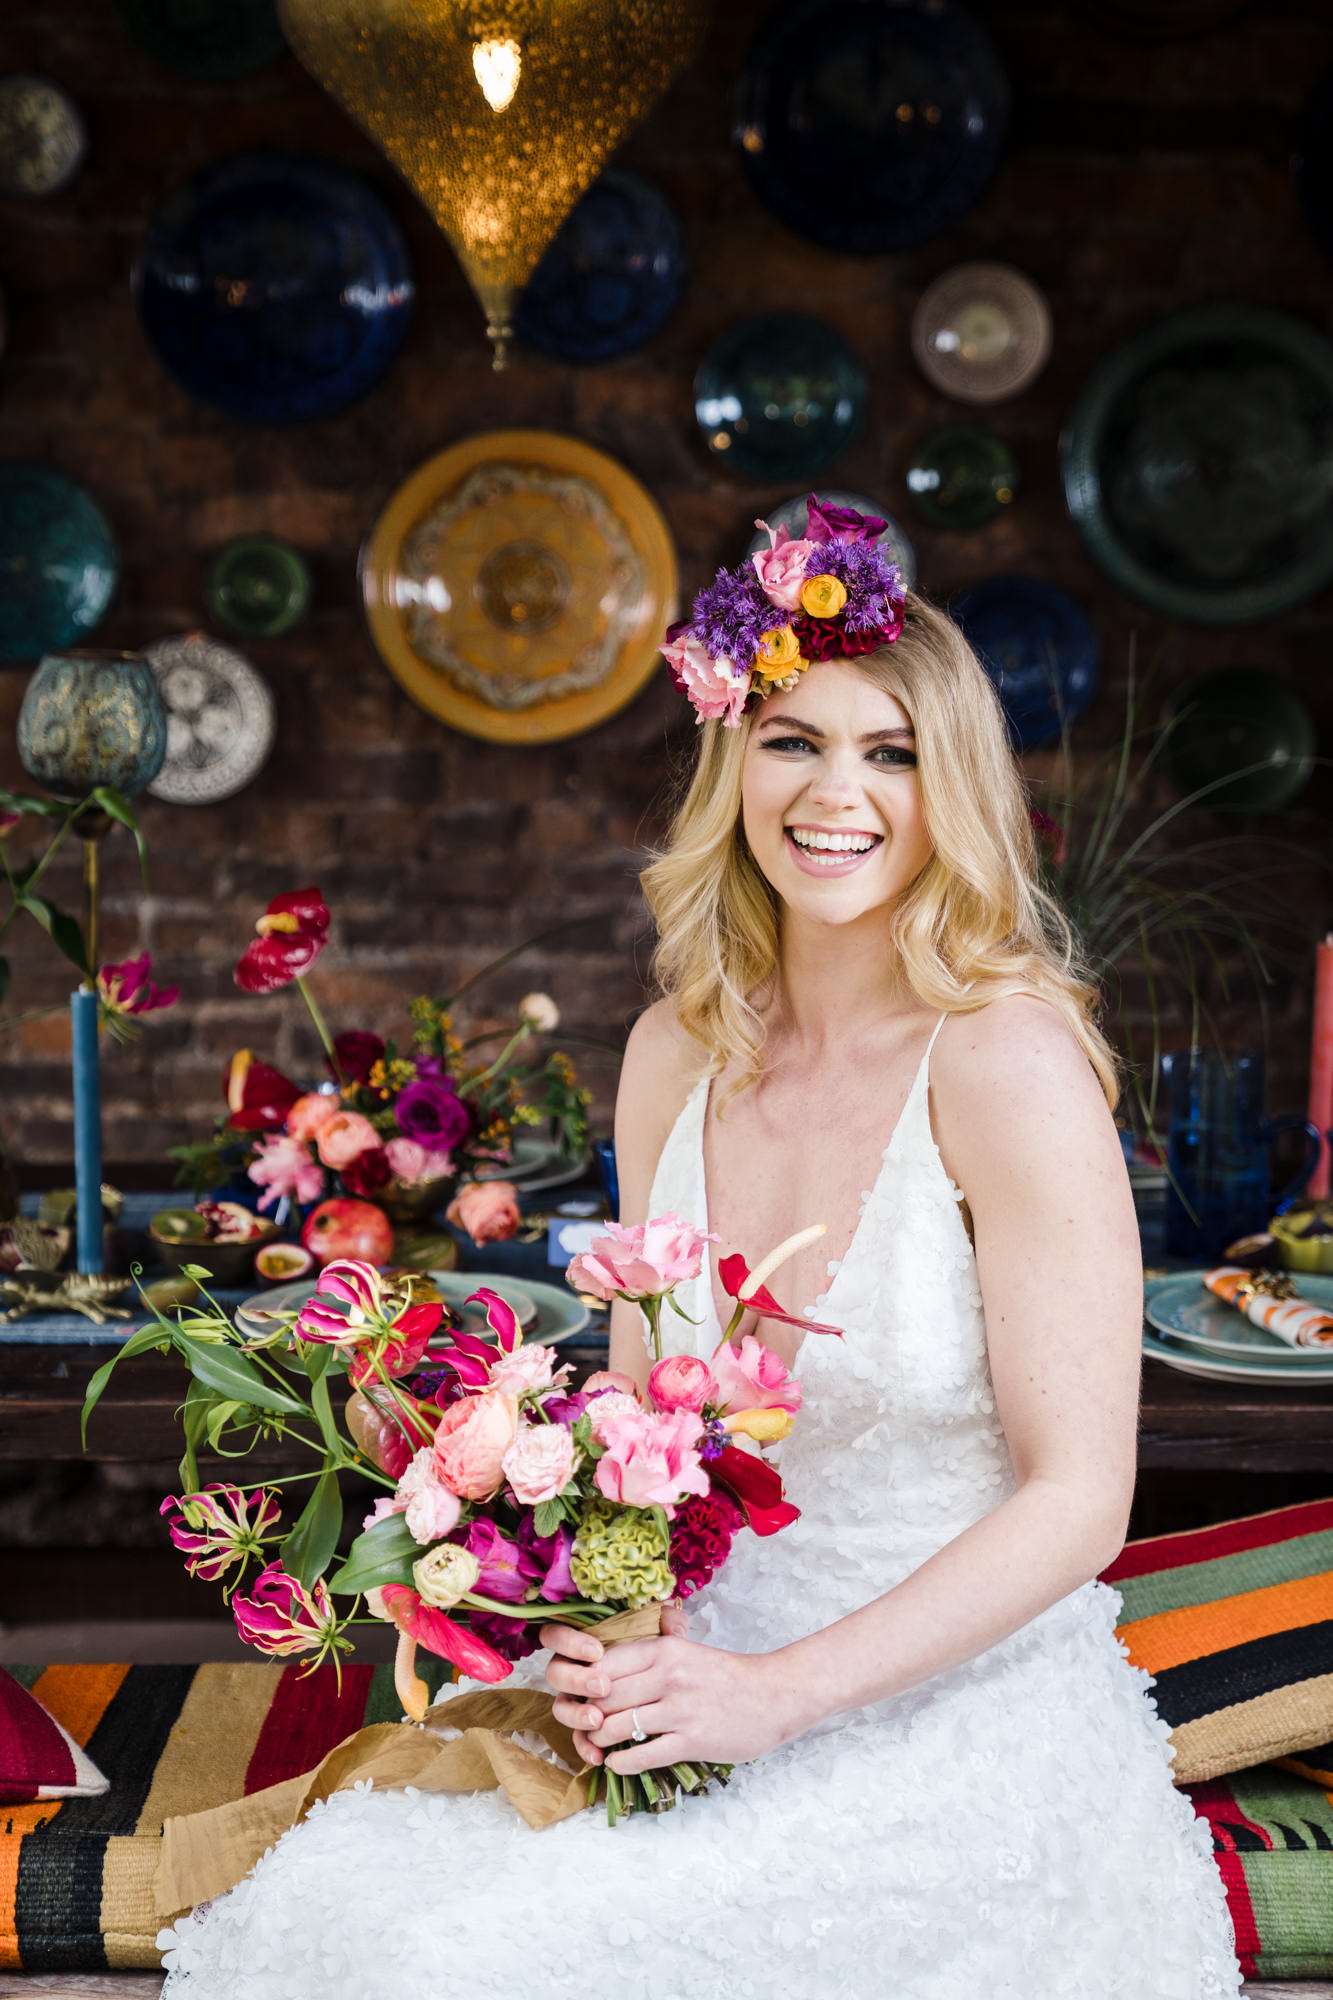 stunning bride smiles at the camera wearing a long white wedding dress from charlie brear holding a colourful bouquet and wearing a statement head crown